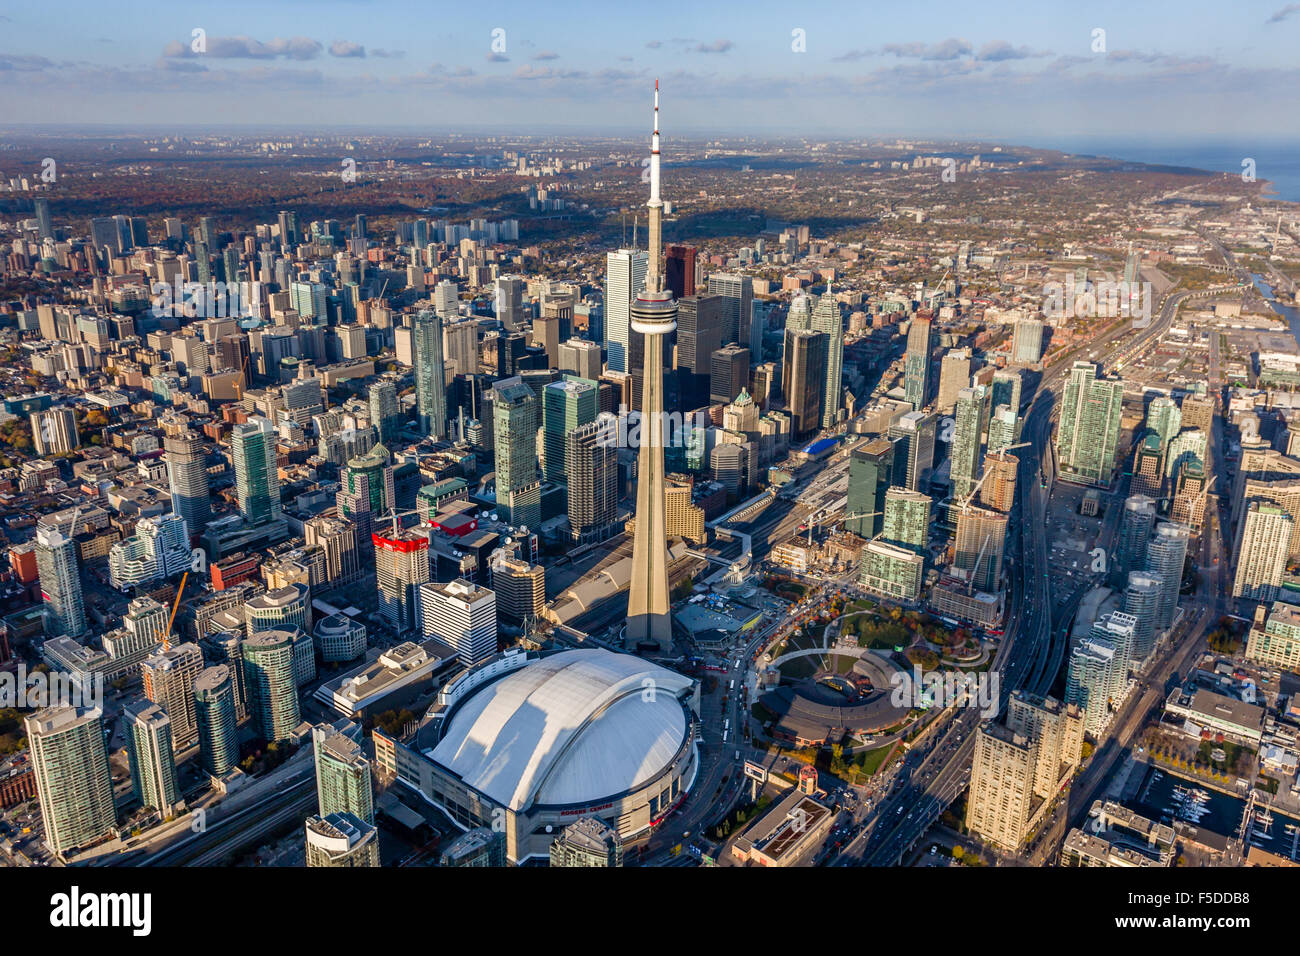 High Level shot of Toronto Downtown with the CN Tower and Rogers Centre Skydome in the foreground. Stock Photo